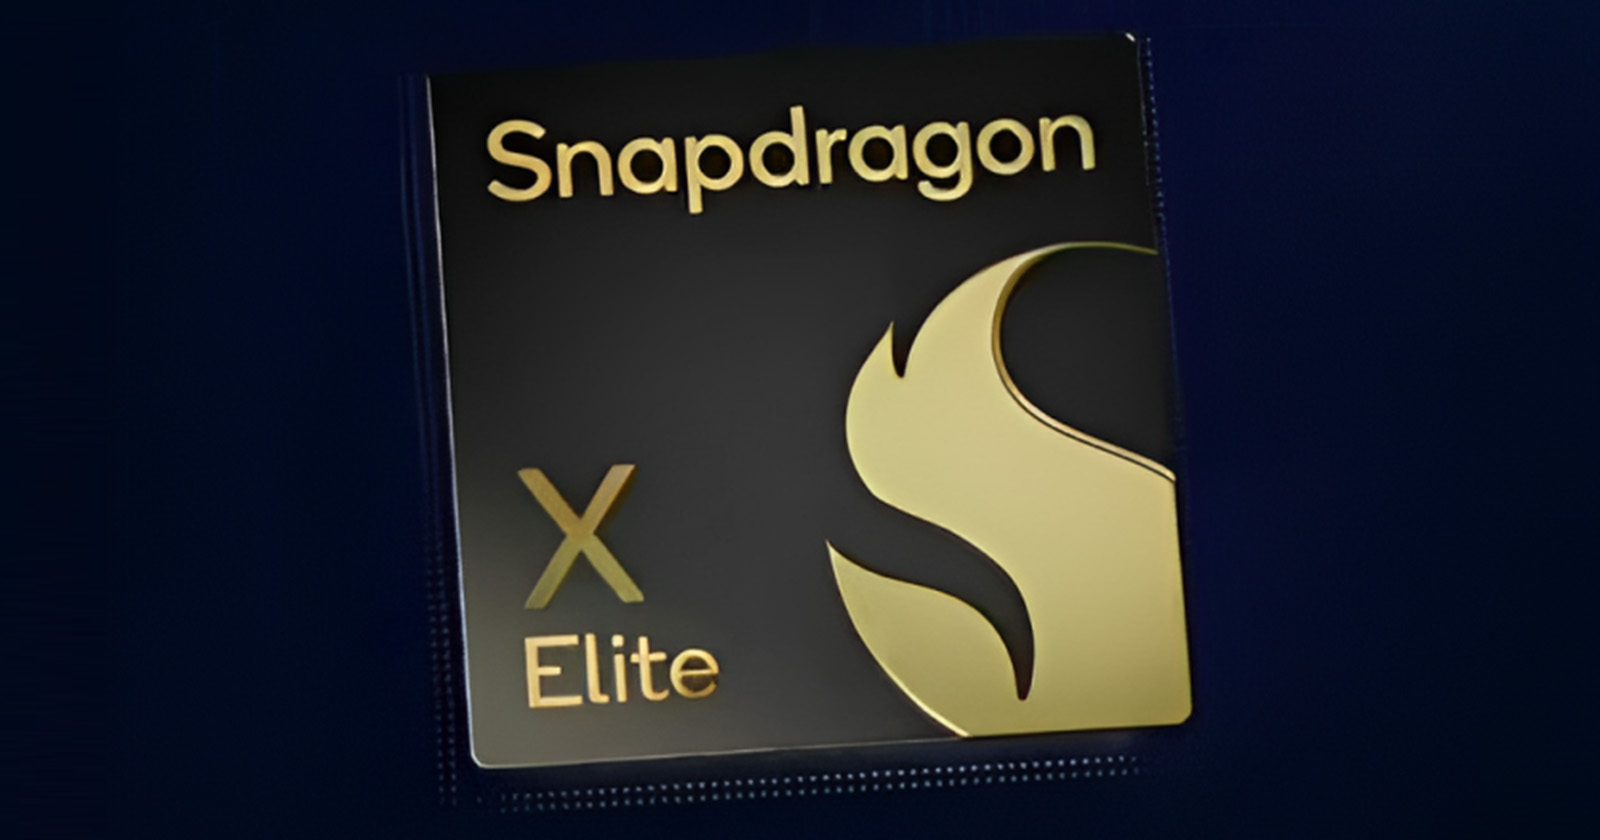 Will the Snapdragon X Elite play games?